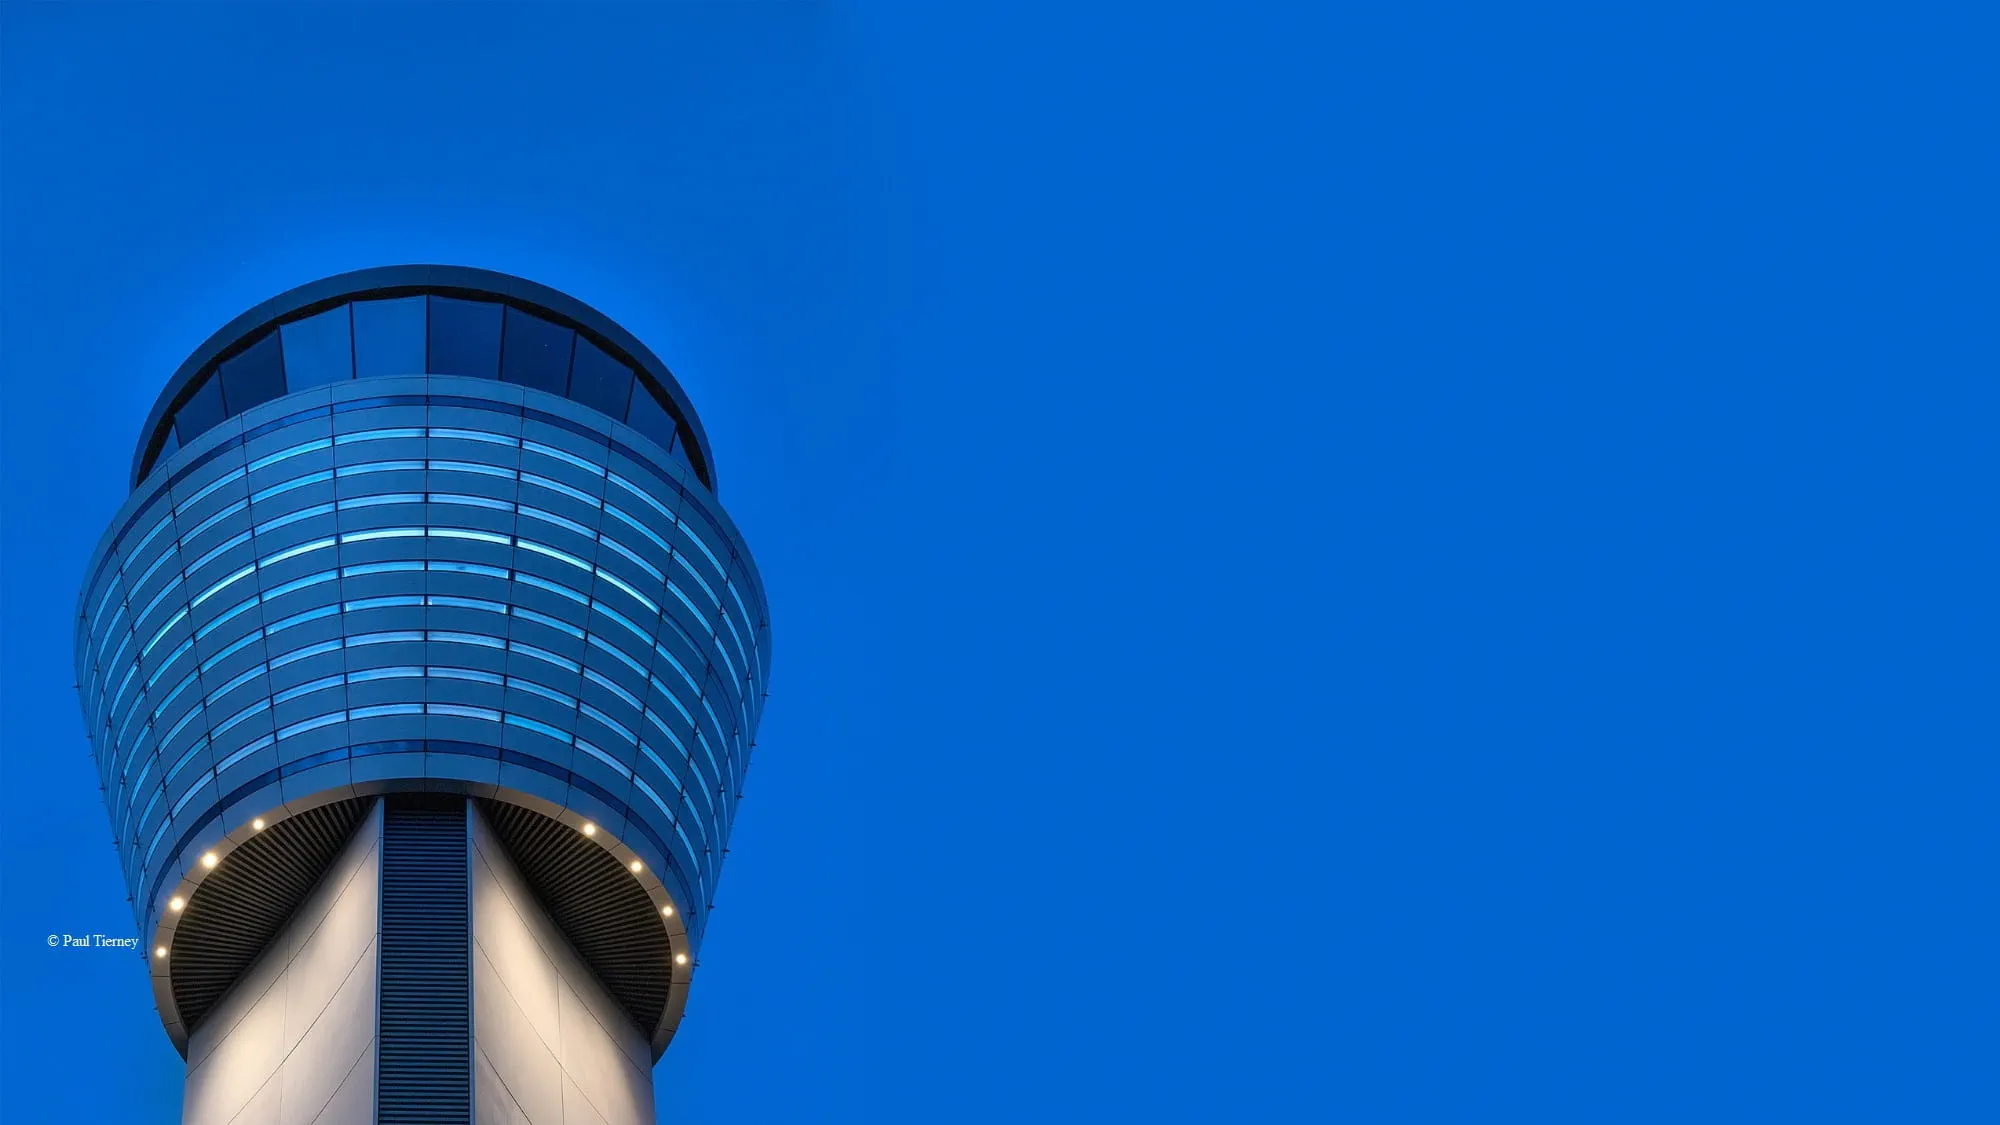 Dublin's new air traffic control tower, Ireland's tallest occupied  structure - Arup